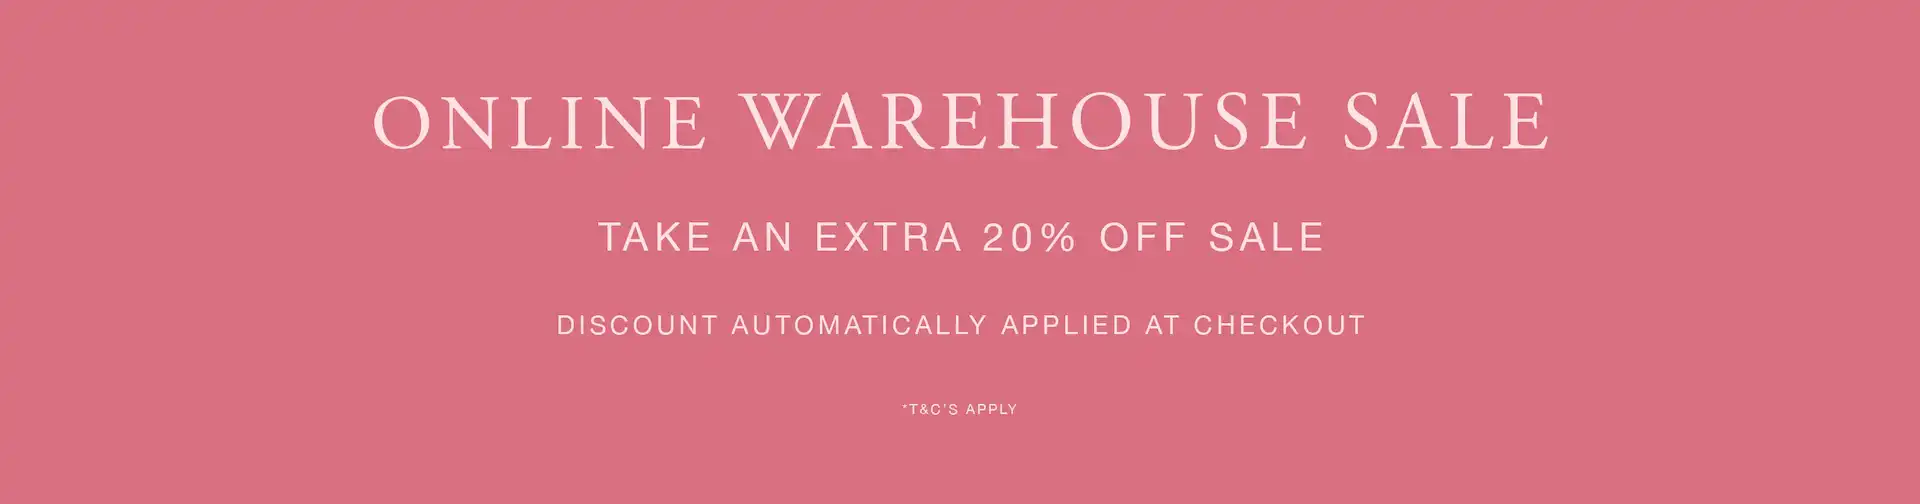 Extra 20% OFF on Online Warehouse sale @ Coco & Lola. Free Express shipping over $100